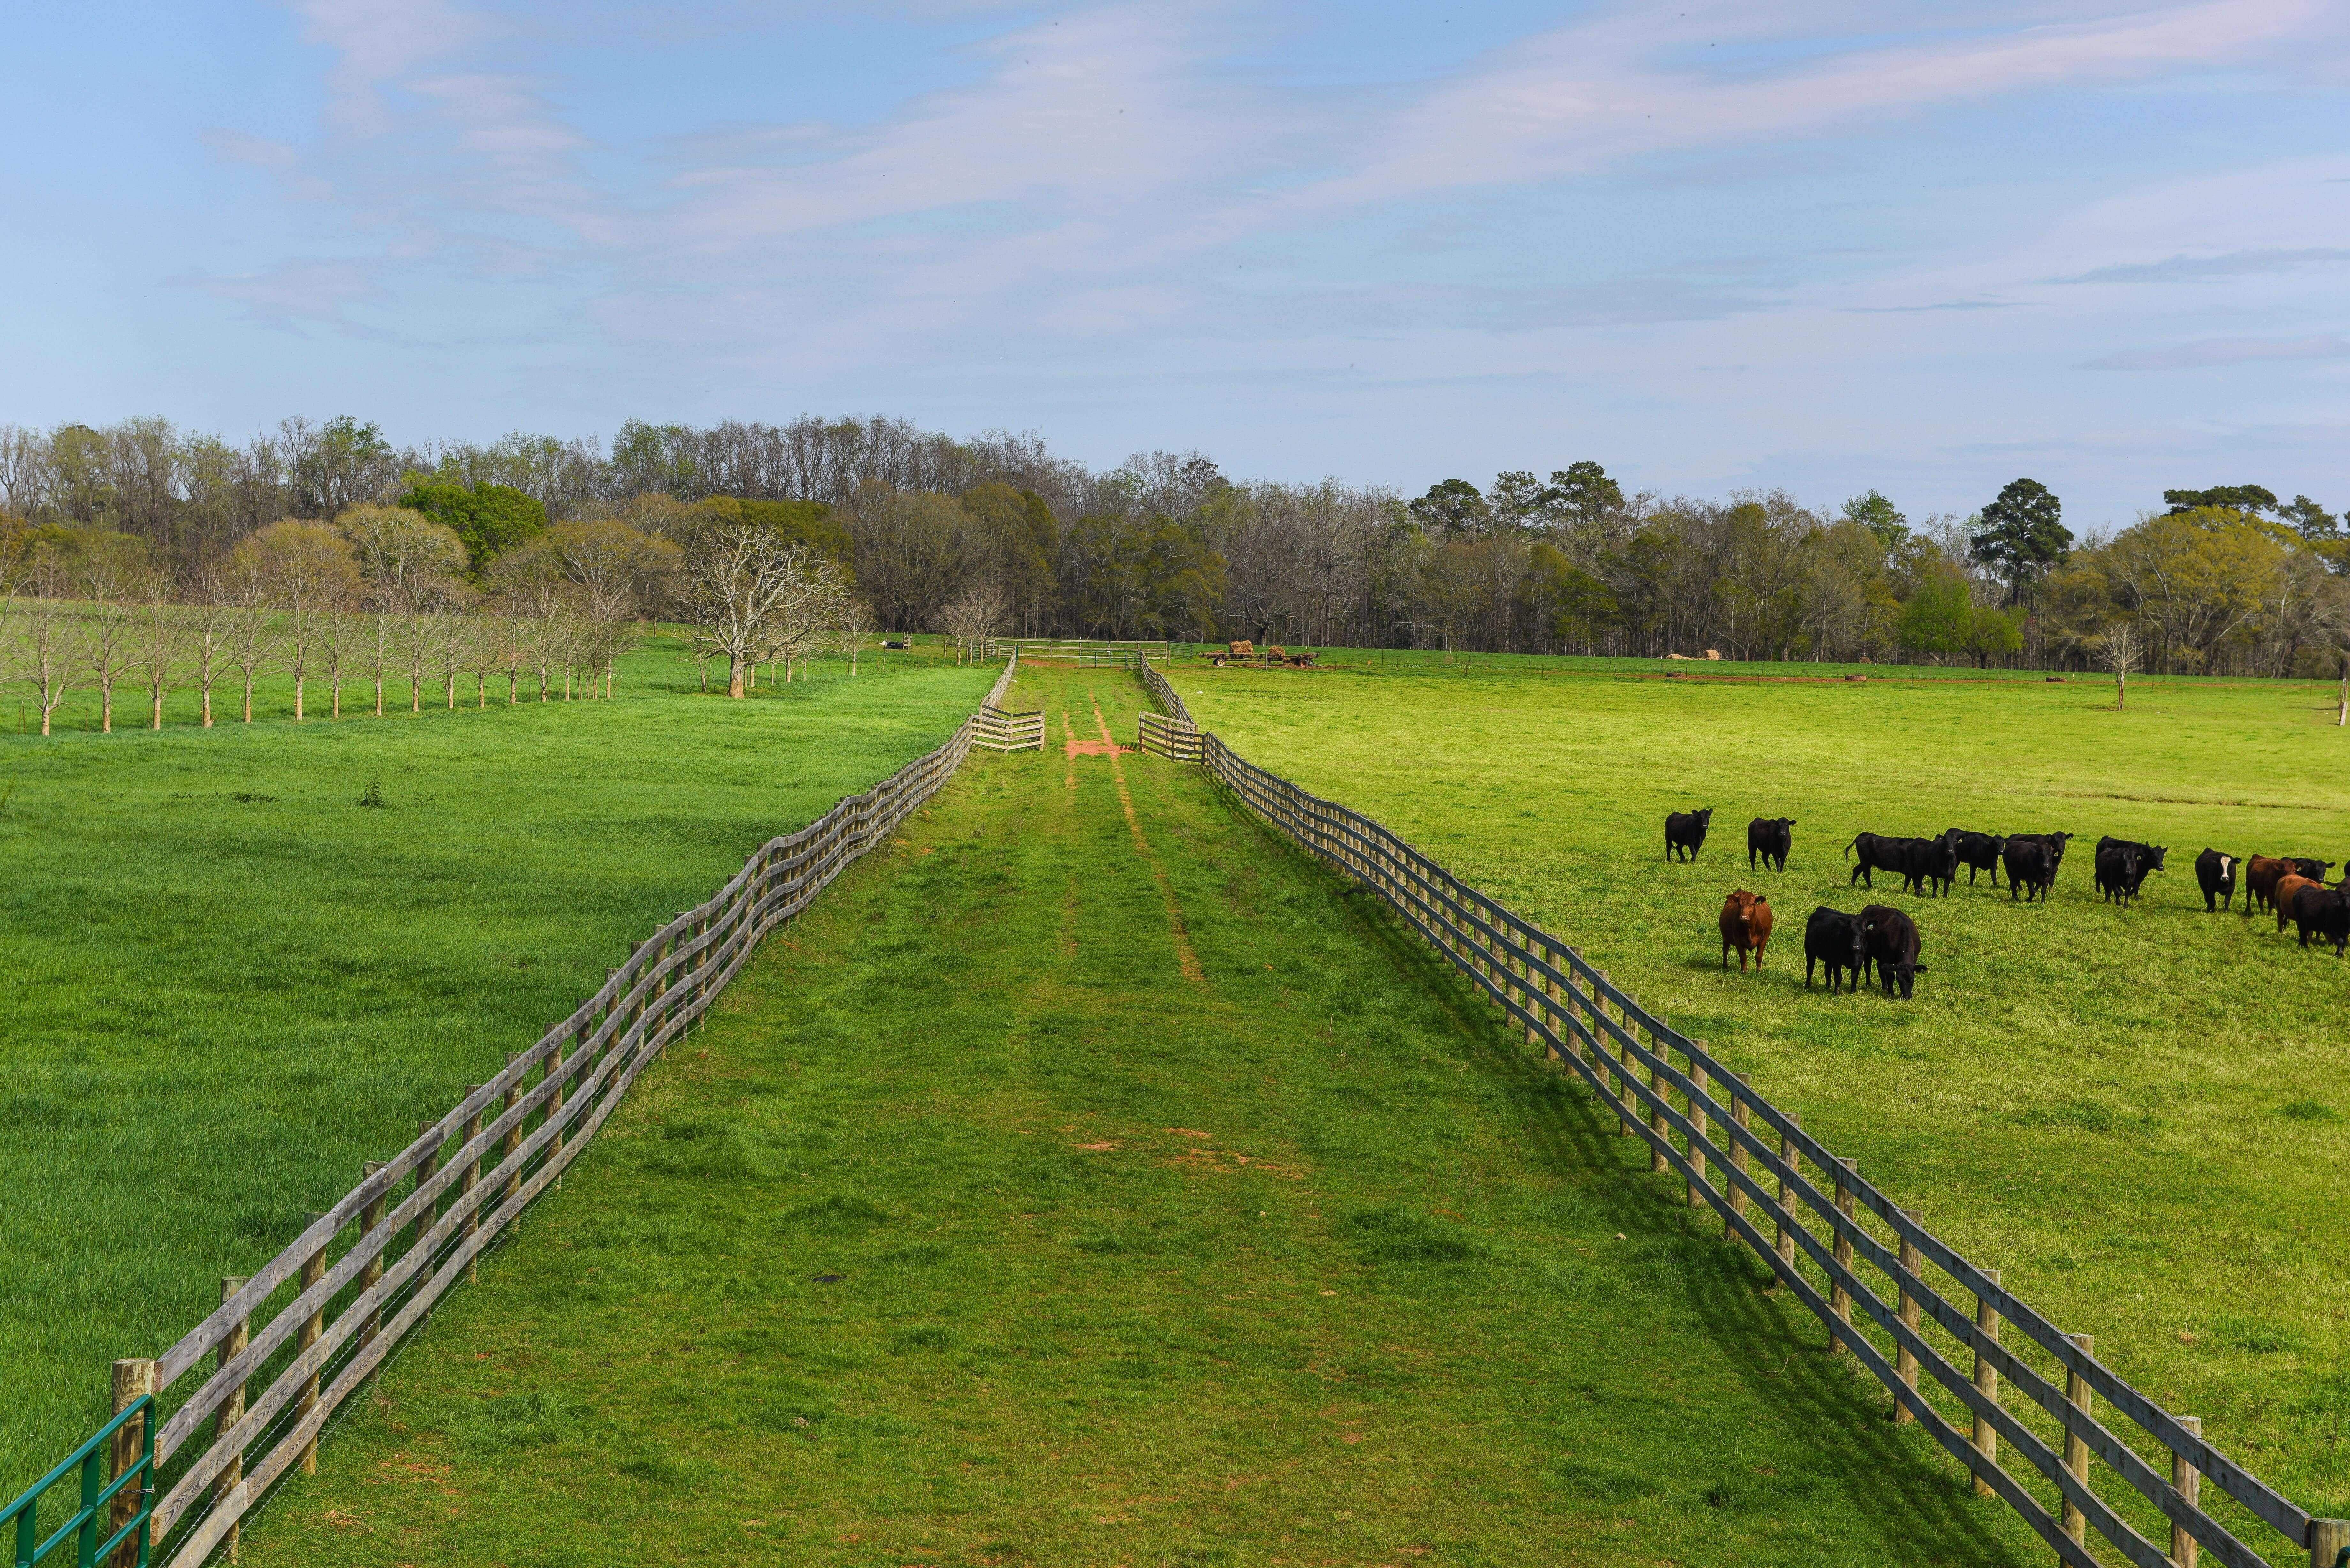 Pasture and grassfed cattle